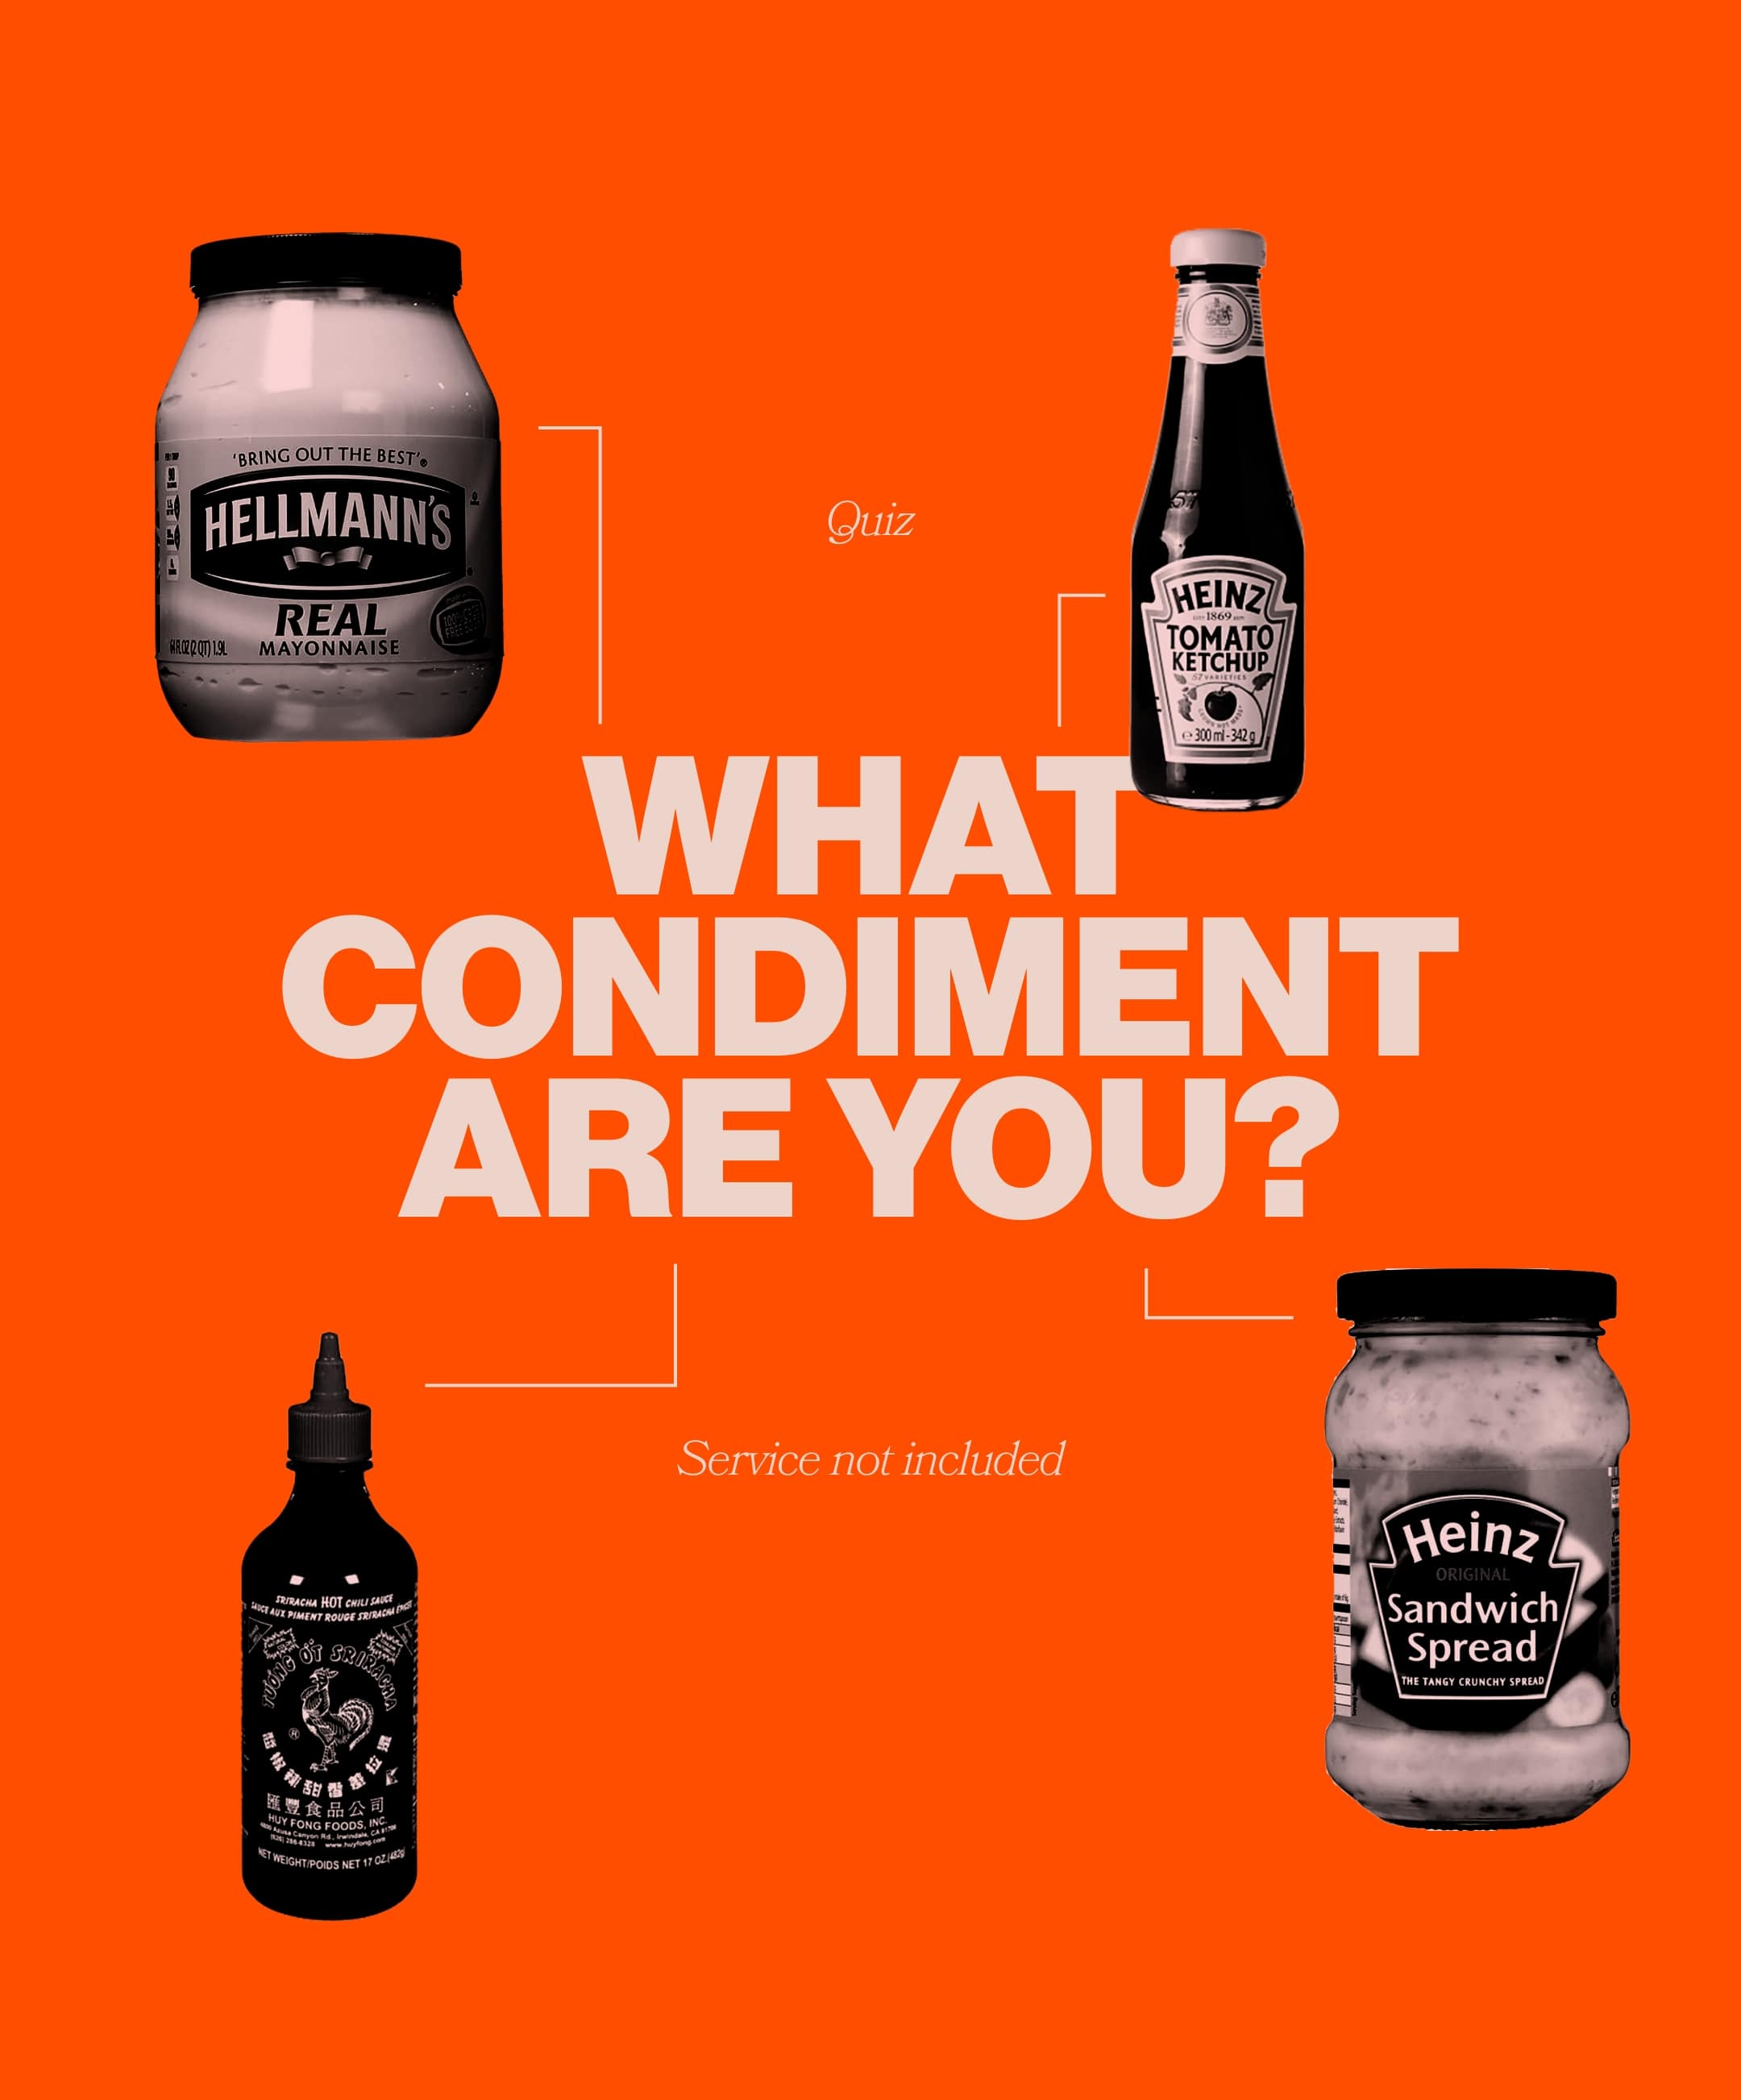 WHAT CONDIMENT ARE YOU?